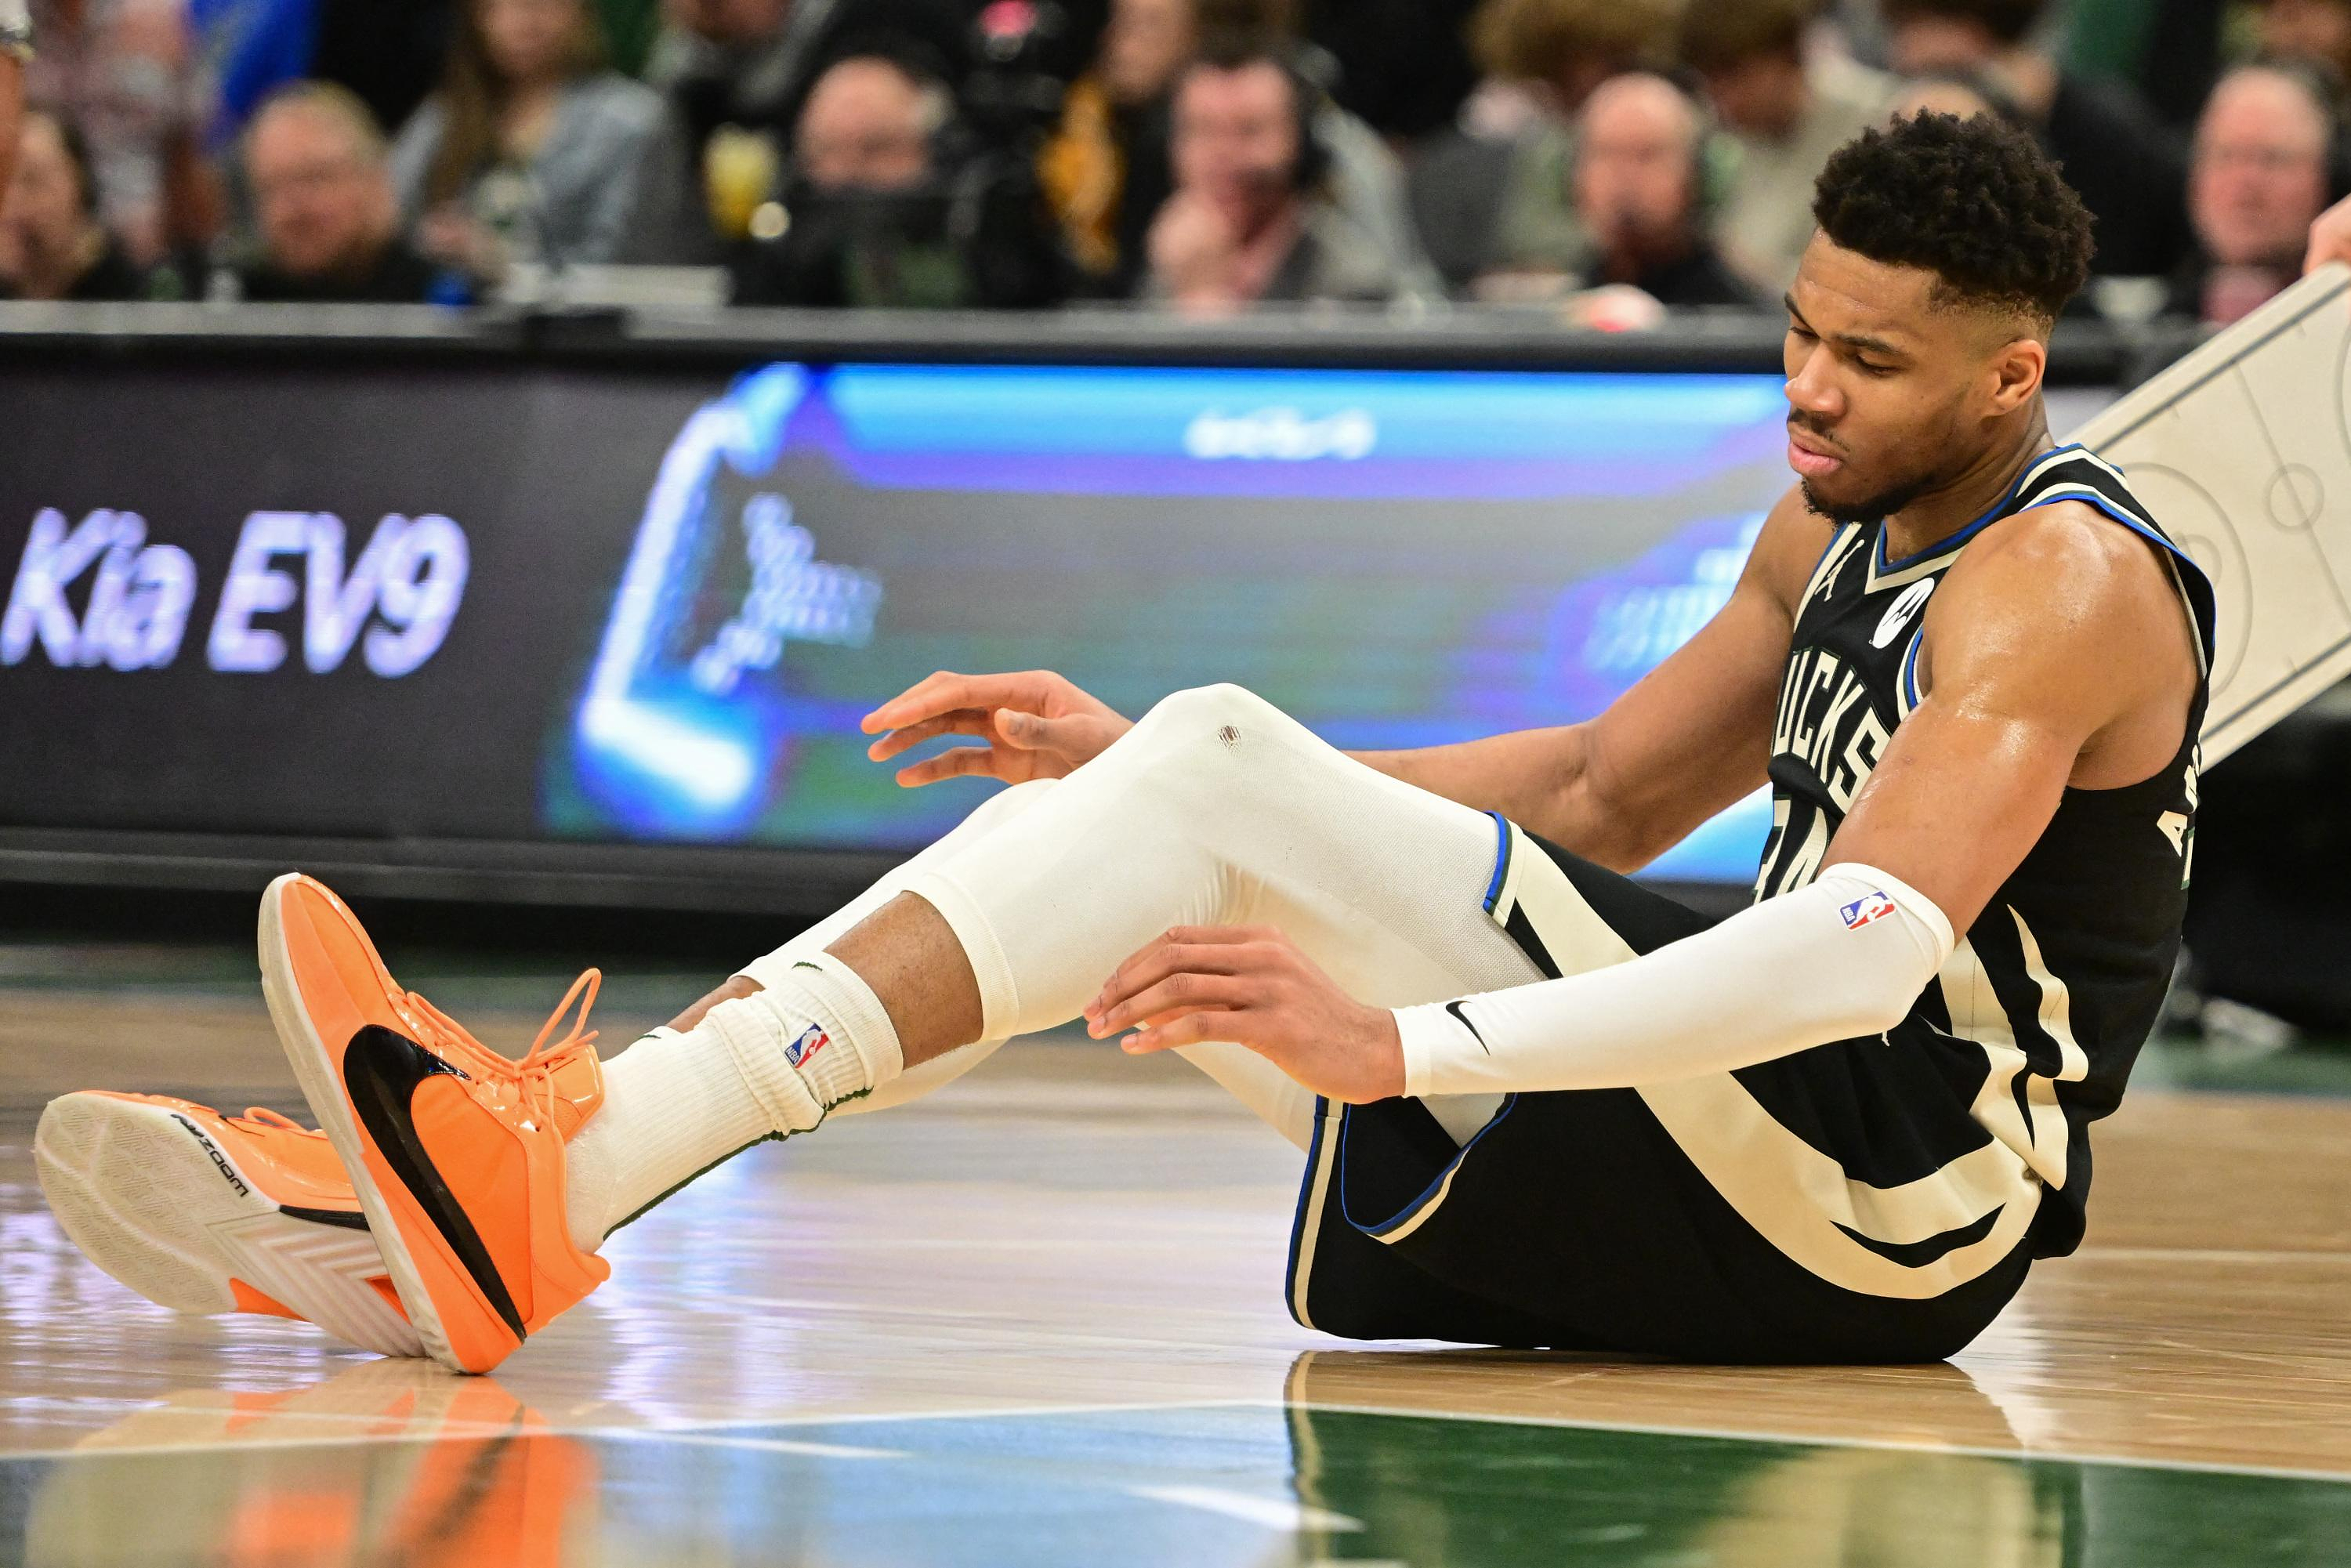 NBA: the Bucks bring down the Celtics, but lose Antetokounmpo, Doncic soars, 20th success for Wembanyama and the Spurs